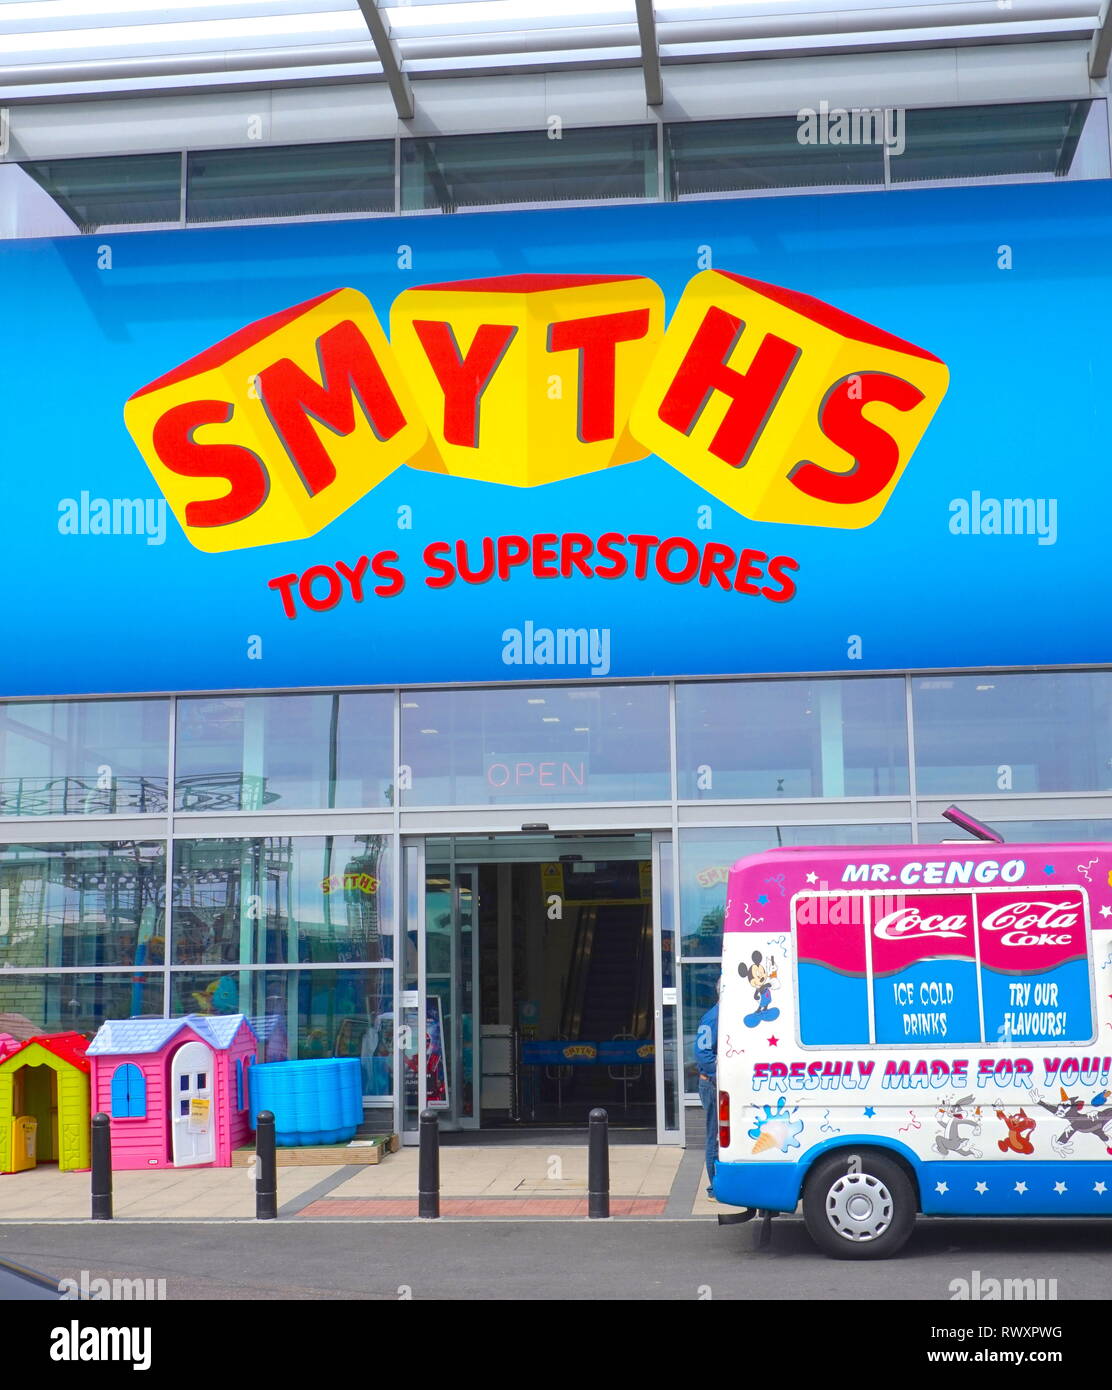 toys superstore